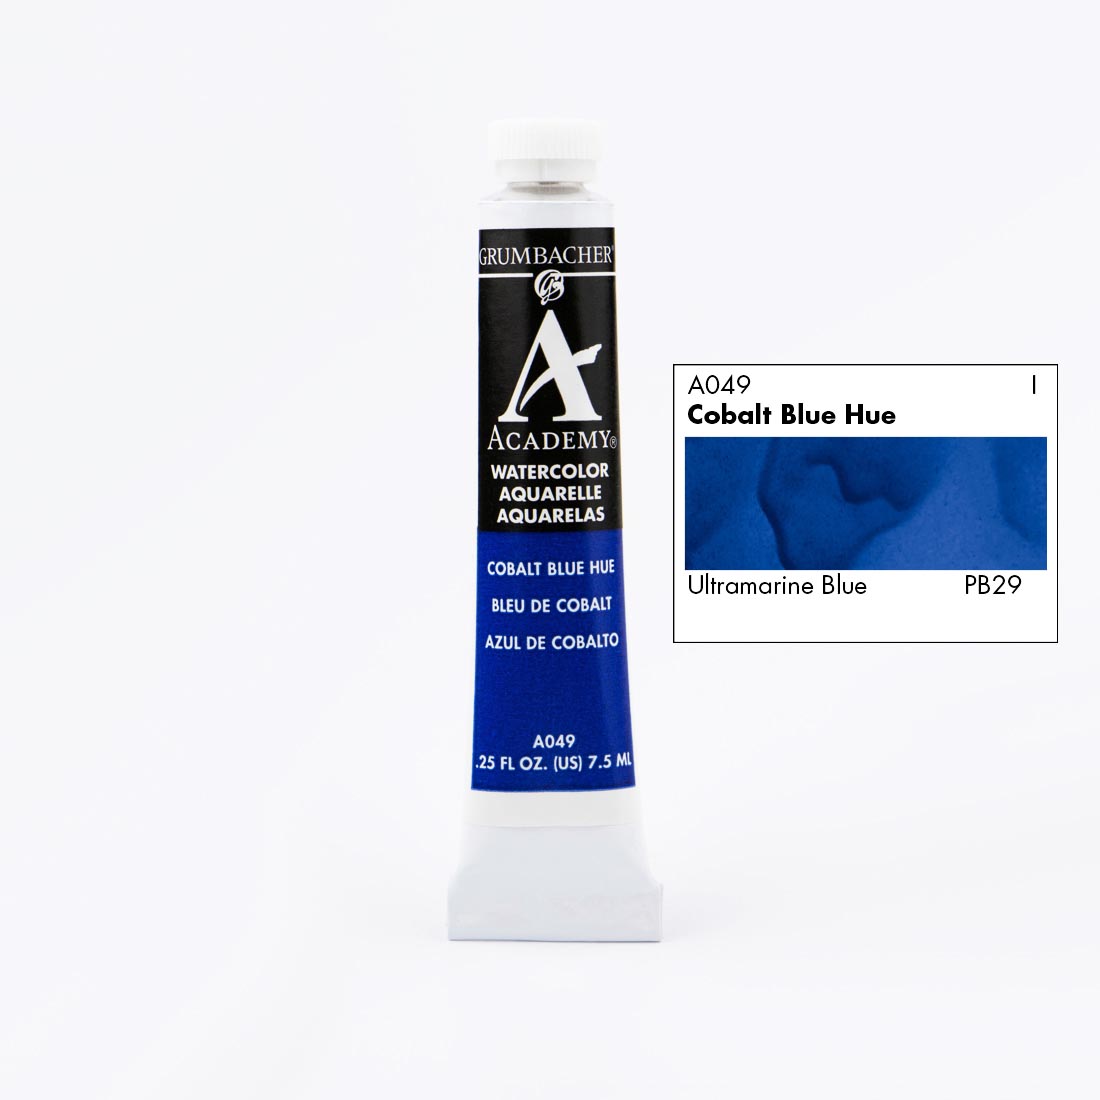 Tube of Grumbacher Academy Watercolor beside Cobalt Blue Hue color swatch